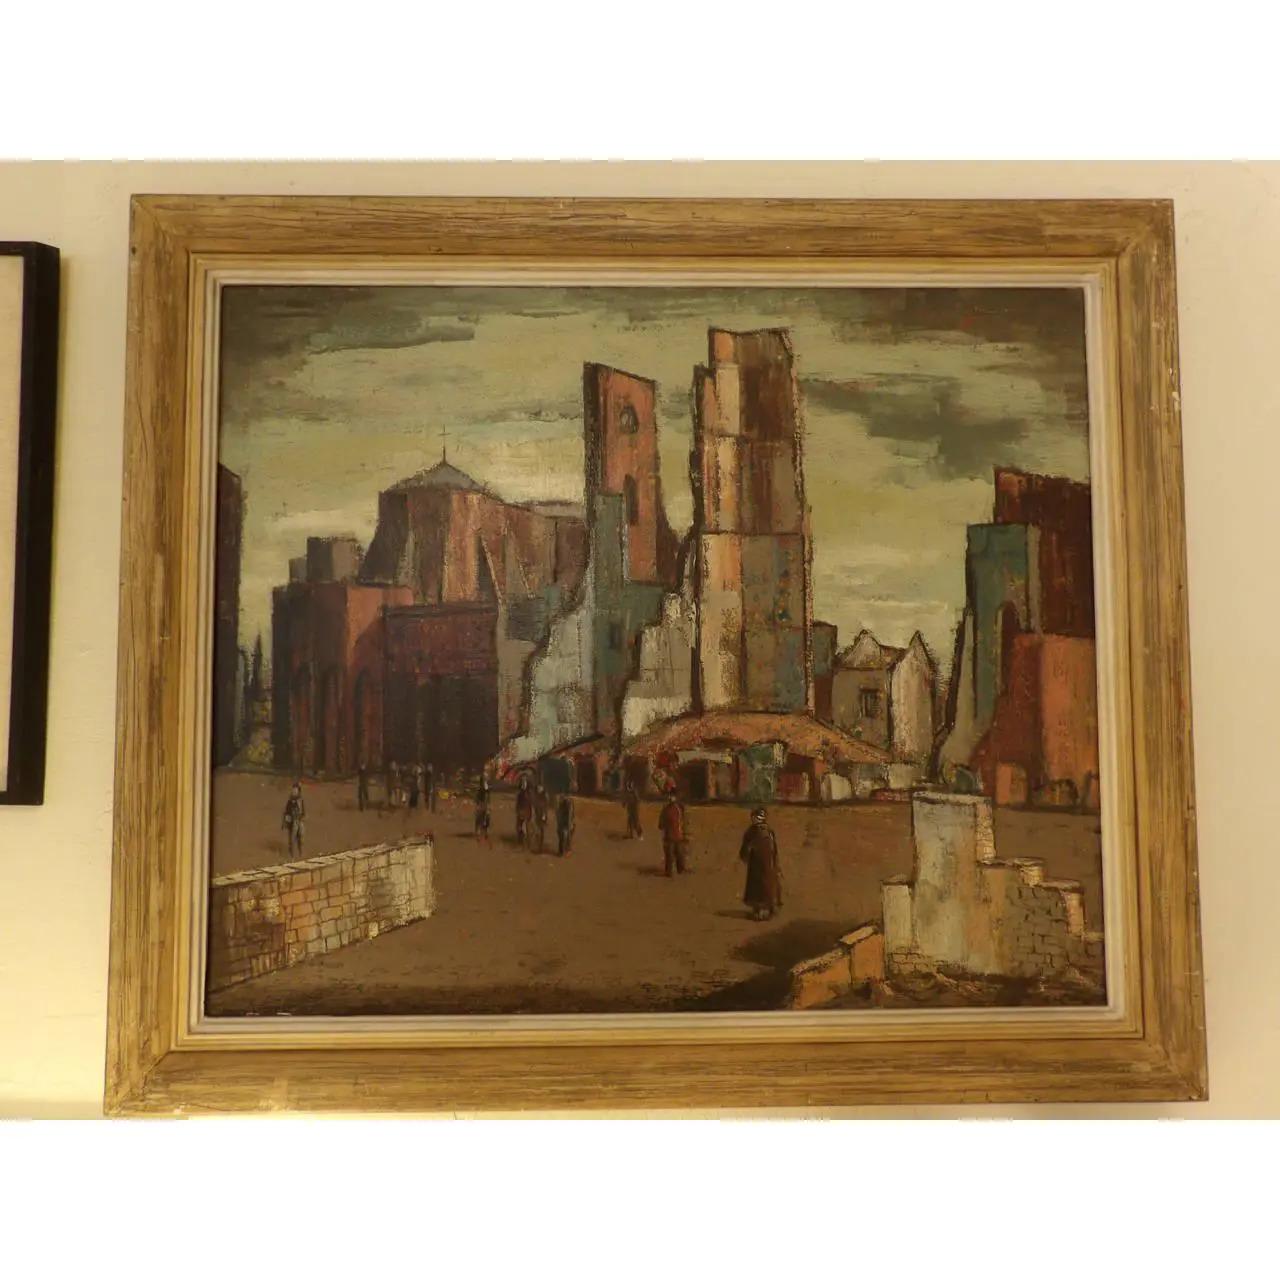 Oil on canvas by important California modernist painter Lundy Siegriest. (1925-1985). Signed lower left. Original period frame measures 33.75